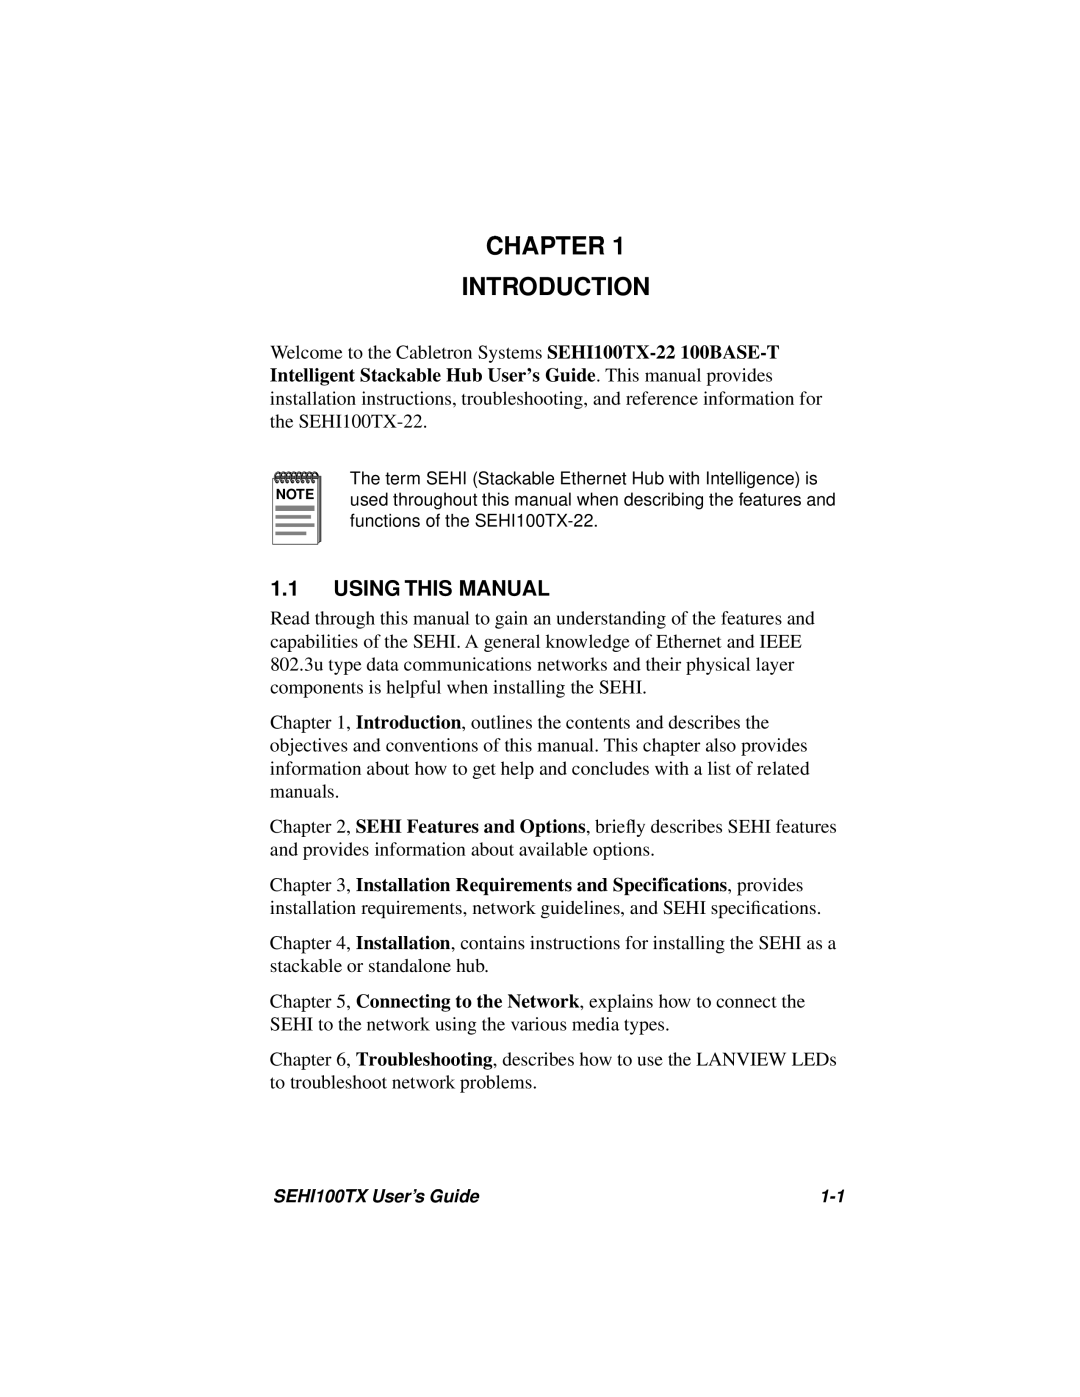 Cabletron Systems SEHI100TX-22 manual Chapter Introduction, Using This Manual 